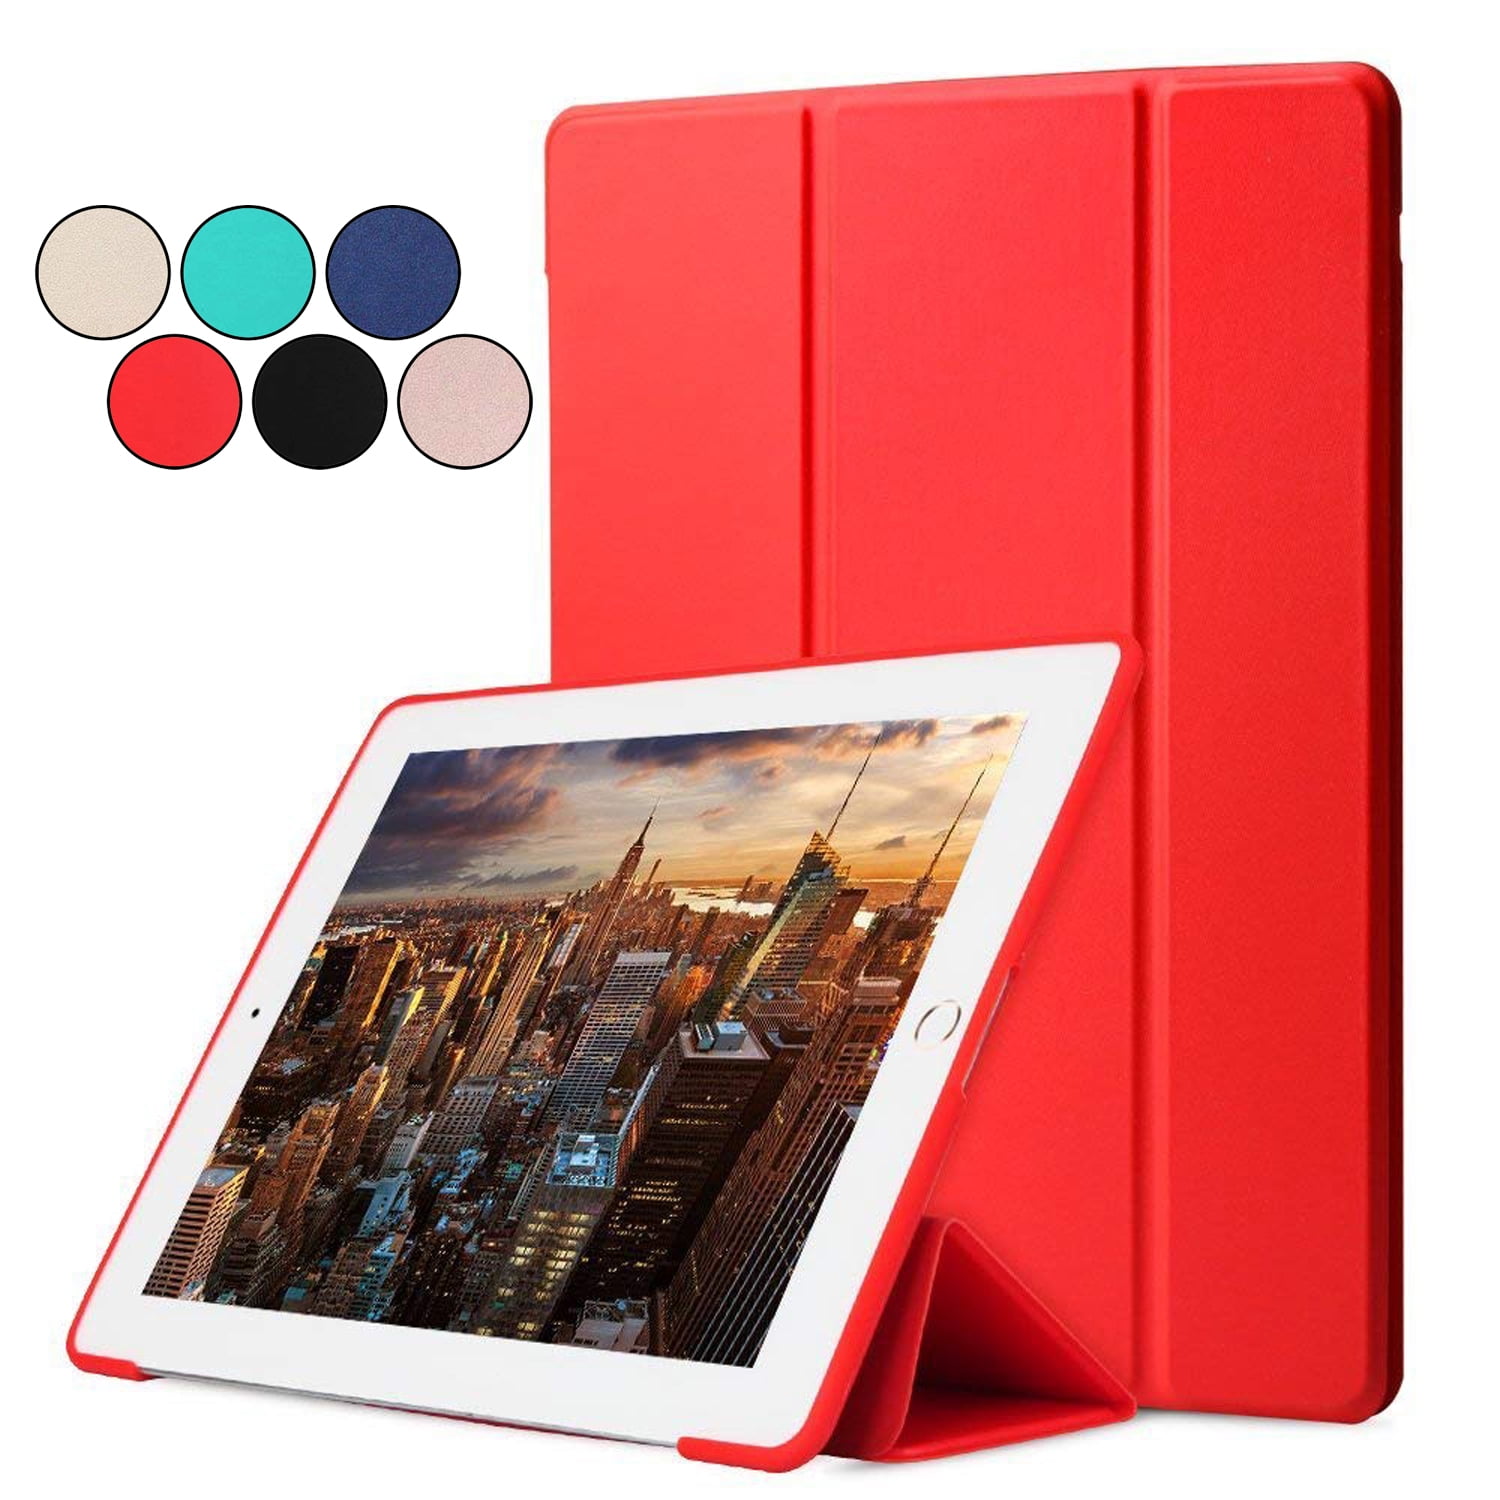 durasafe case for ipad mini 3/2 / 1 7.9 inch [ a1432 a1454 a1455 a1489 a1490 a1491 a1599 a1600 ] tri fold smart cover with soft silicone back, auto sleep/wake : soft back - red